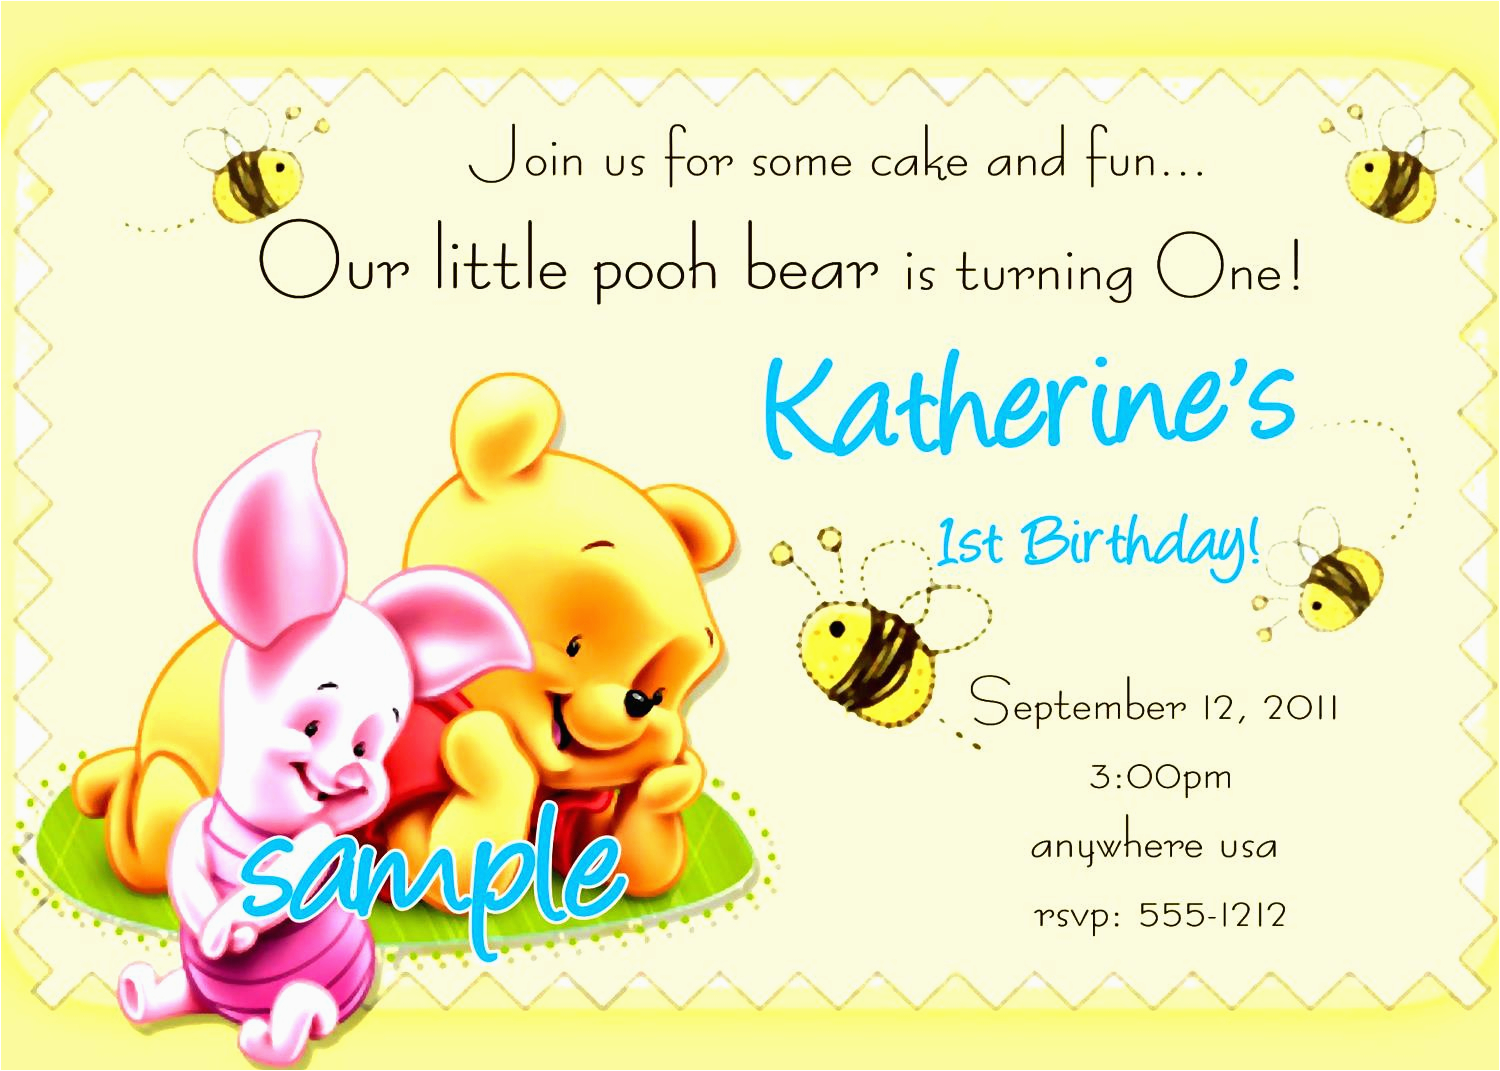 Invitation Card for Birthday Party Online 21 Kids Birthday Invitation Wording that We Can Make